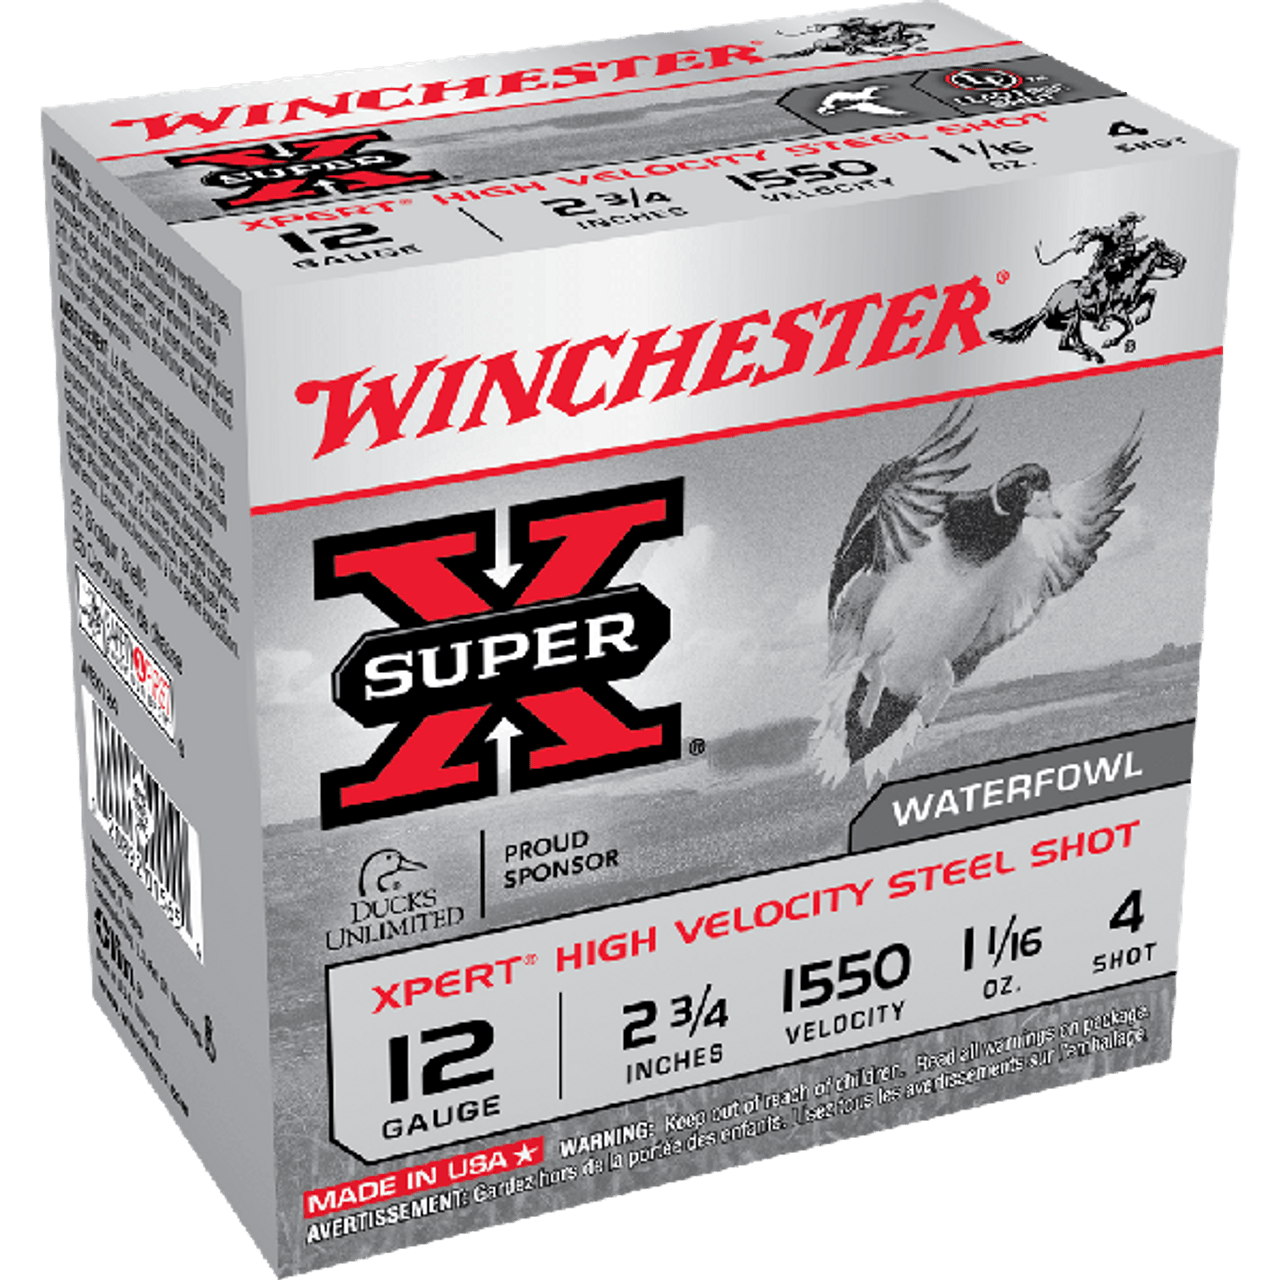 In 1873, less than a decade after the Civil War and when Westward expansion was in full gallop, Winchester introduced the first successful centerfire cartridges. Winchester has set the world standard in superior ammunition performance and innovation for more than a century. To millions of hunters and shooters worldwide, the name "Winchester" means quality and performance. No matter the sport, game, or protection, you can always depend on Winchester Ammunition to perform as promised.

25 Round Box 

Features and Specifications:
Manufacturer Number: WEX124
Caliber: 12 Gauge
Hull Length: 2 3/4 Inches
Load: 1 1/16 OZ # 4 Steel Shot
Rounds: 25 Rounds per Box
Muzzle Velocity: (High Velocity) 1550 FPS
Features: 
* Accurate high quality load
* Reliable Primers
* Lead Free 
Usage: Target, Personal Defense, Hunting